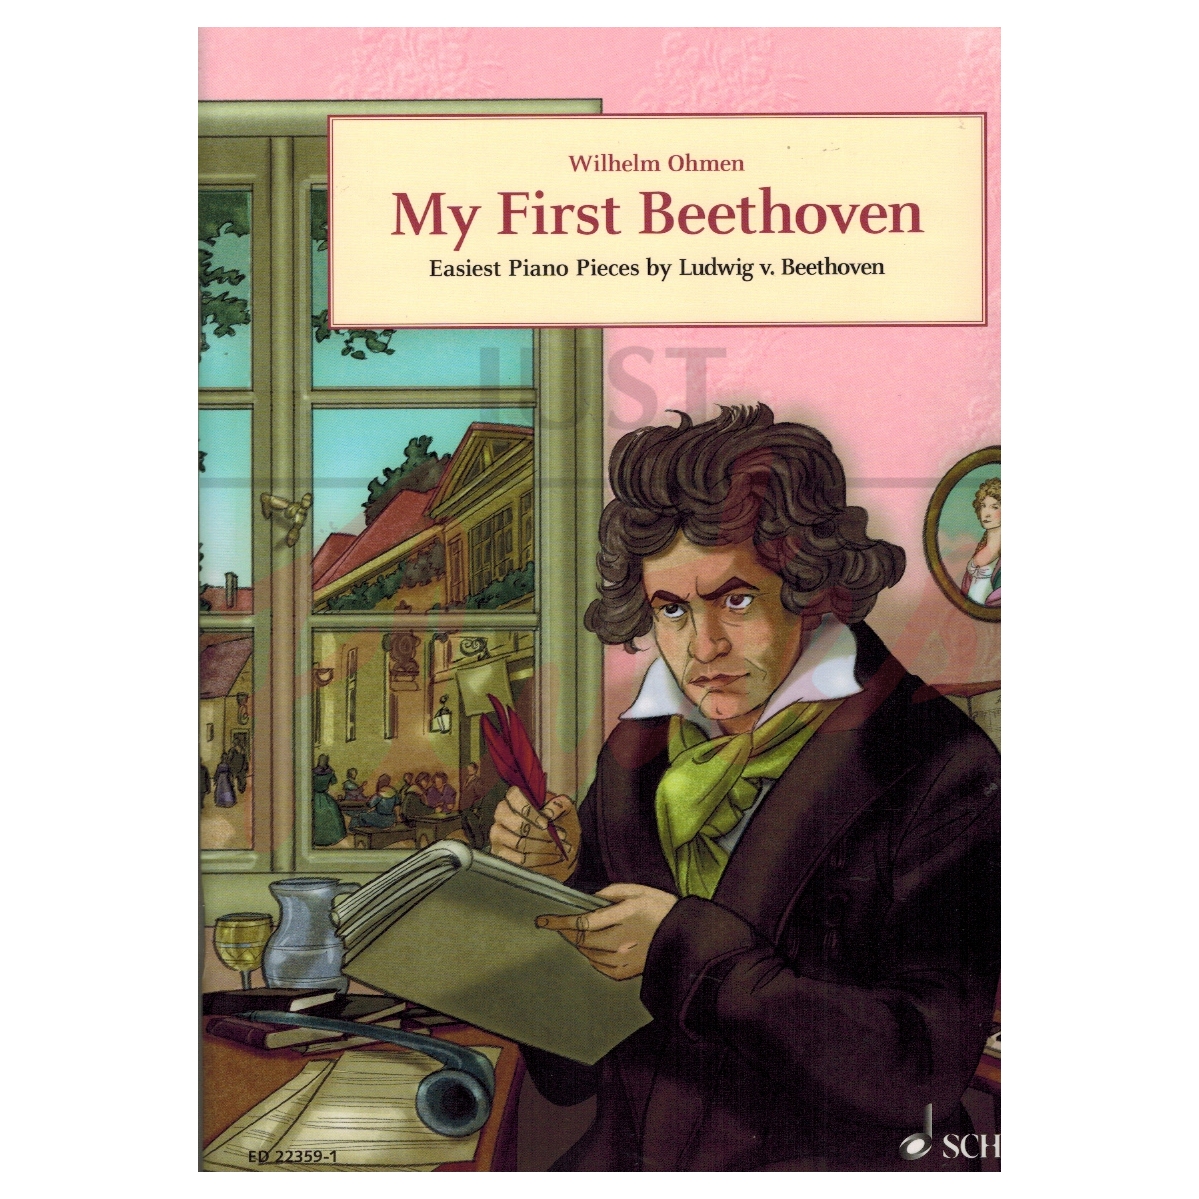 My First Beethoven for Piano